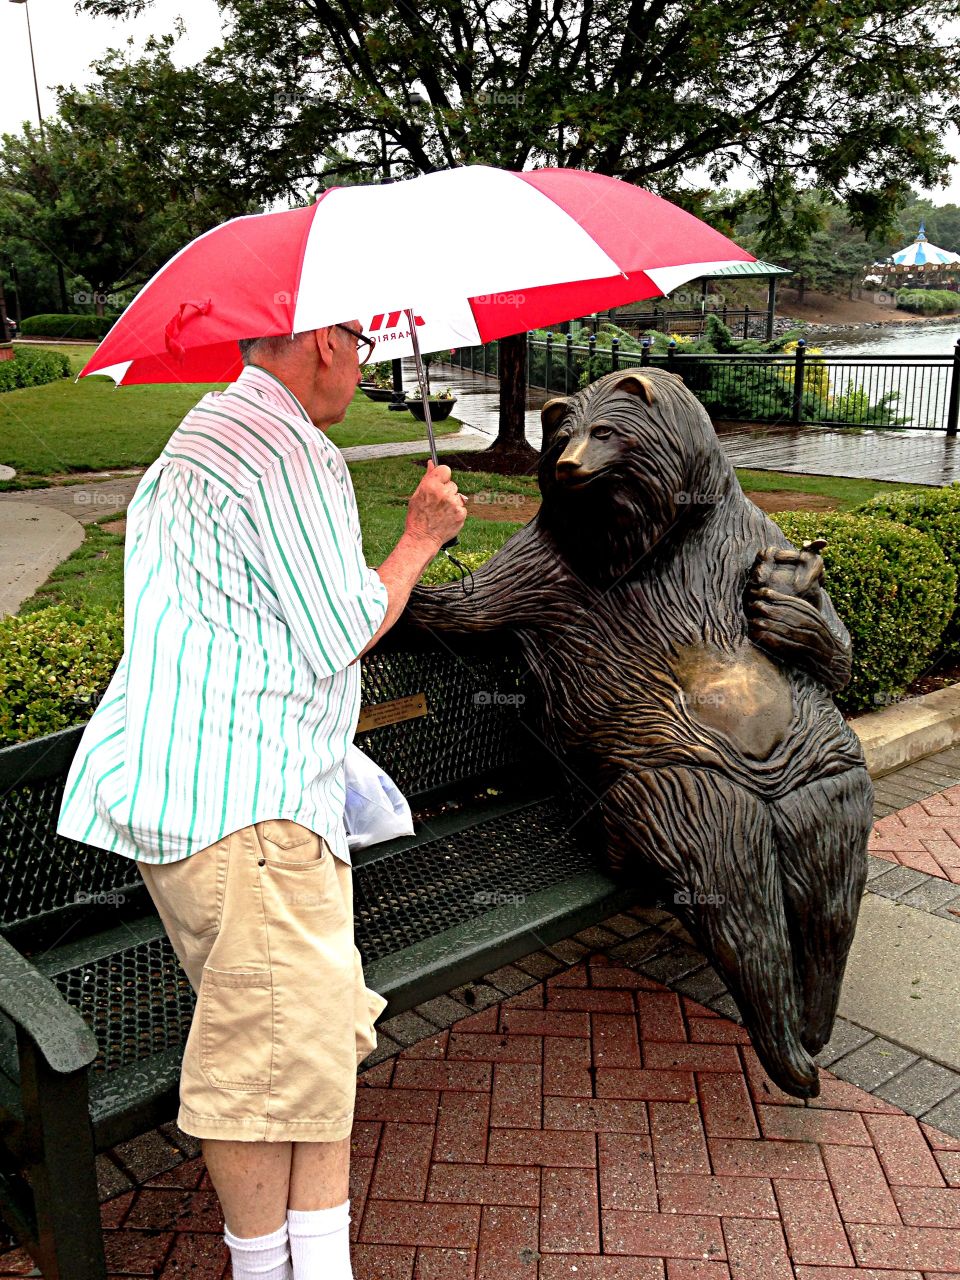 Man and Bear. Man talking to bear sculpture in park on a rainy day